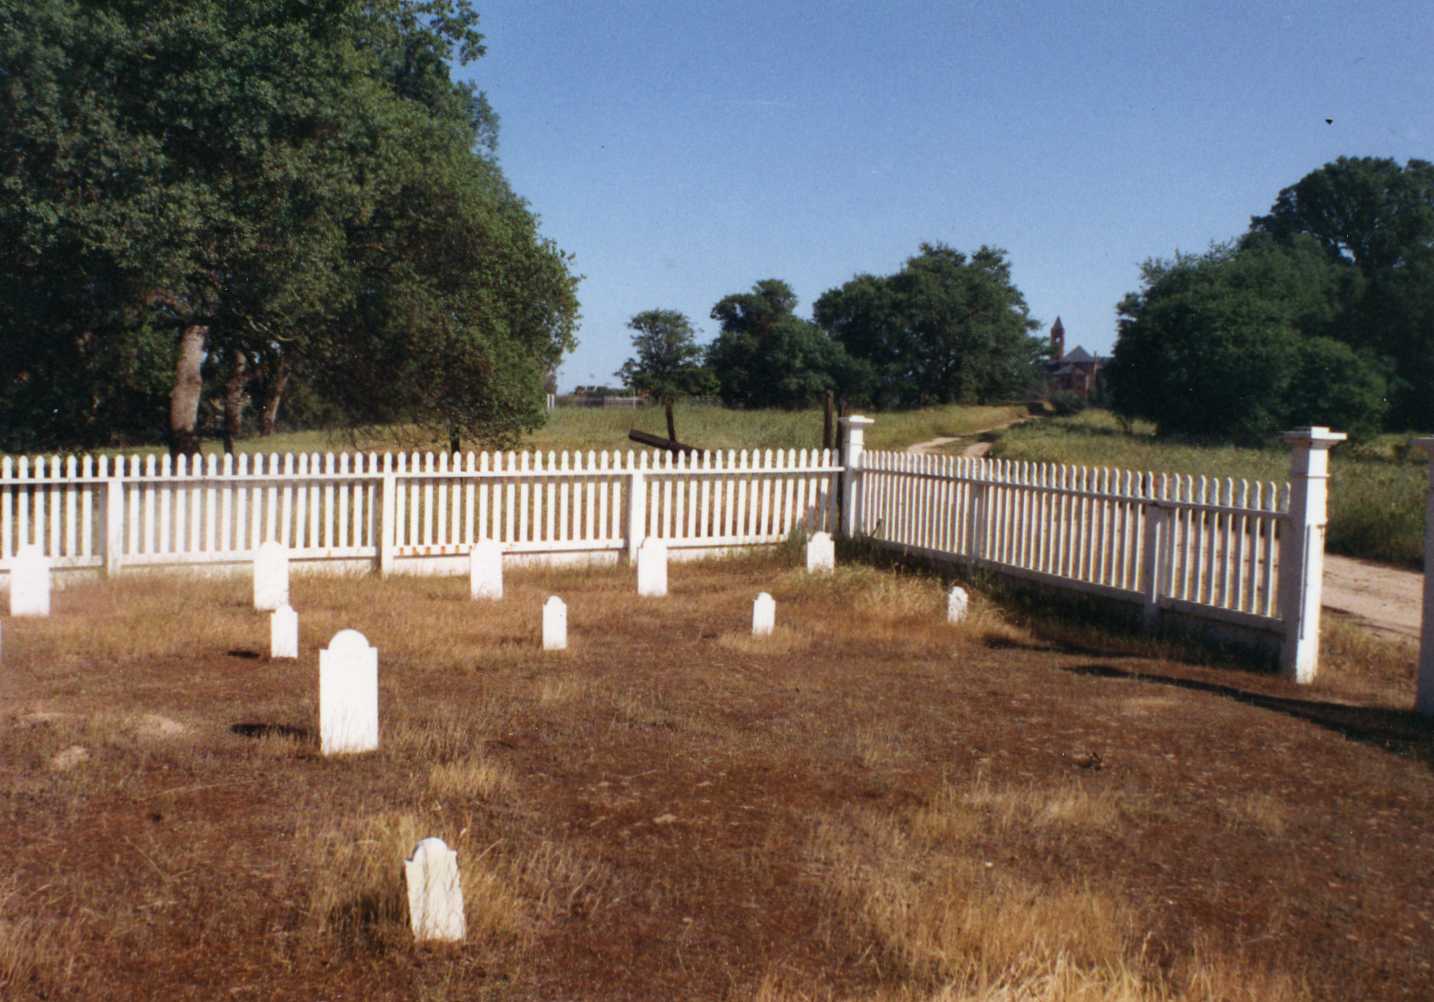 Preston cemetery with administration building in background.